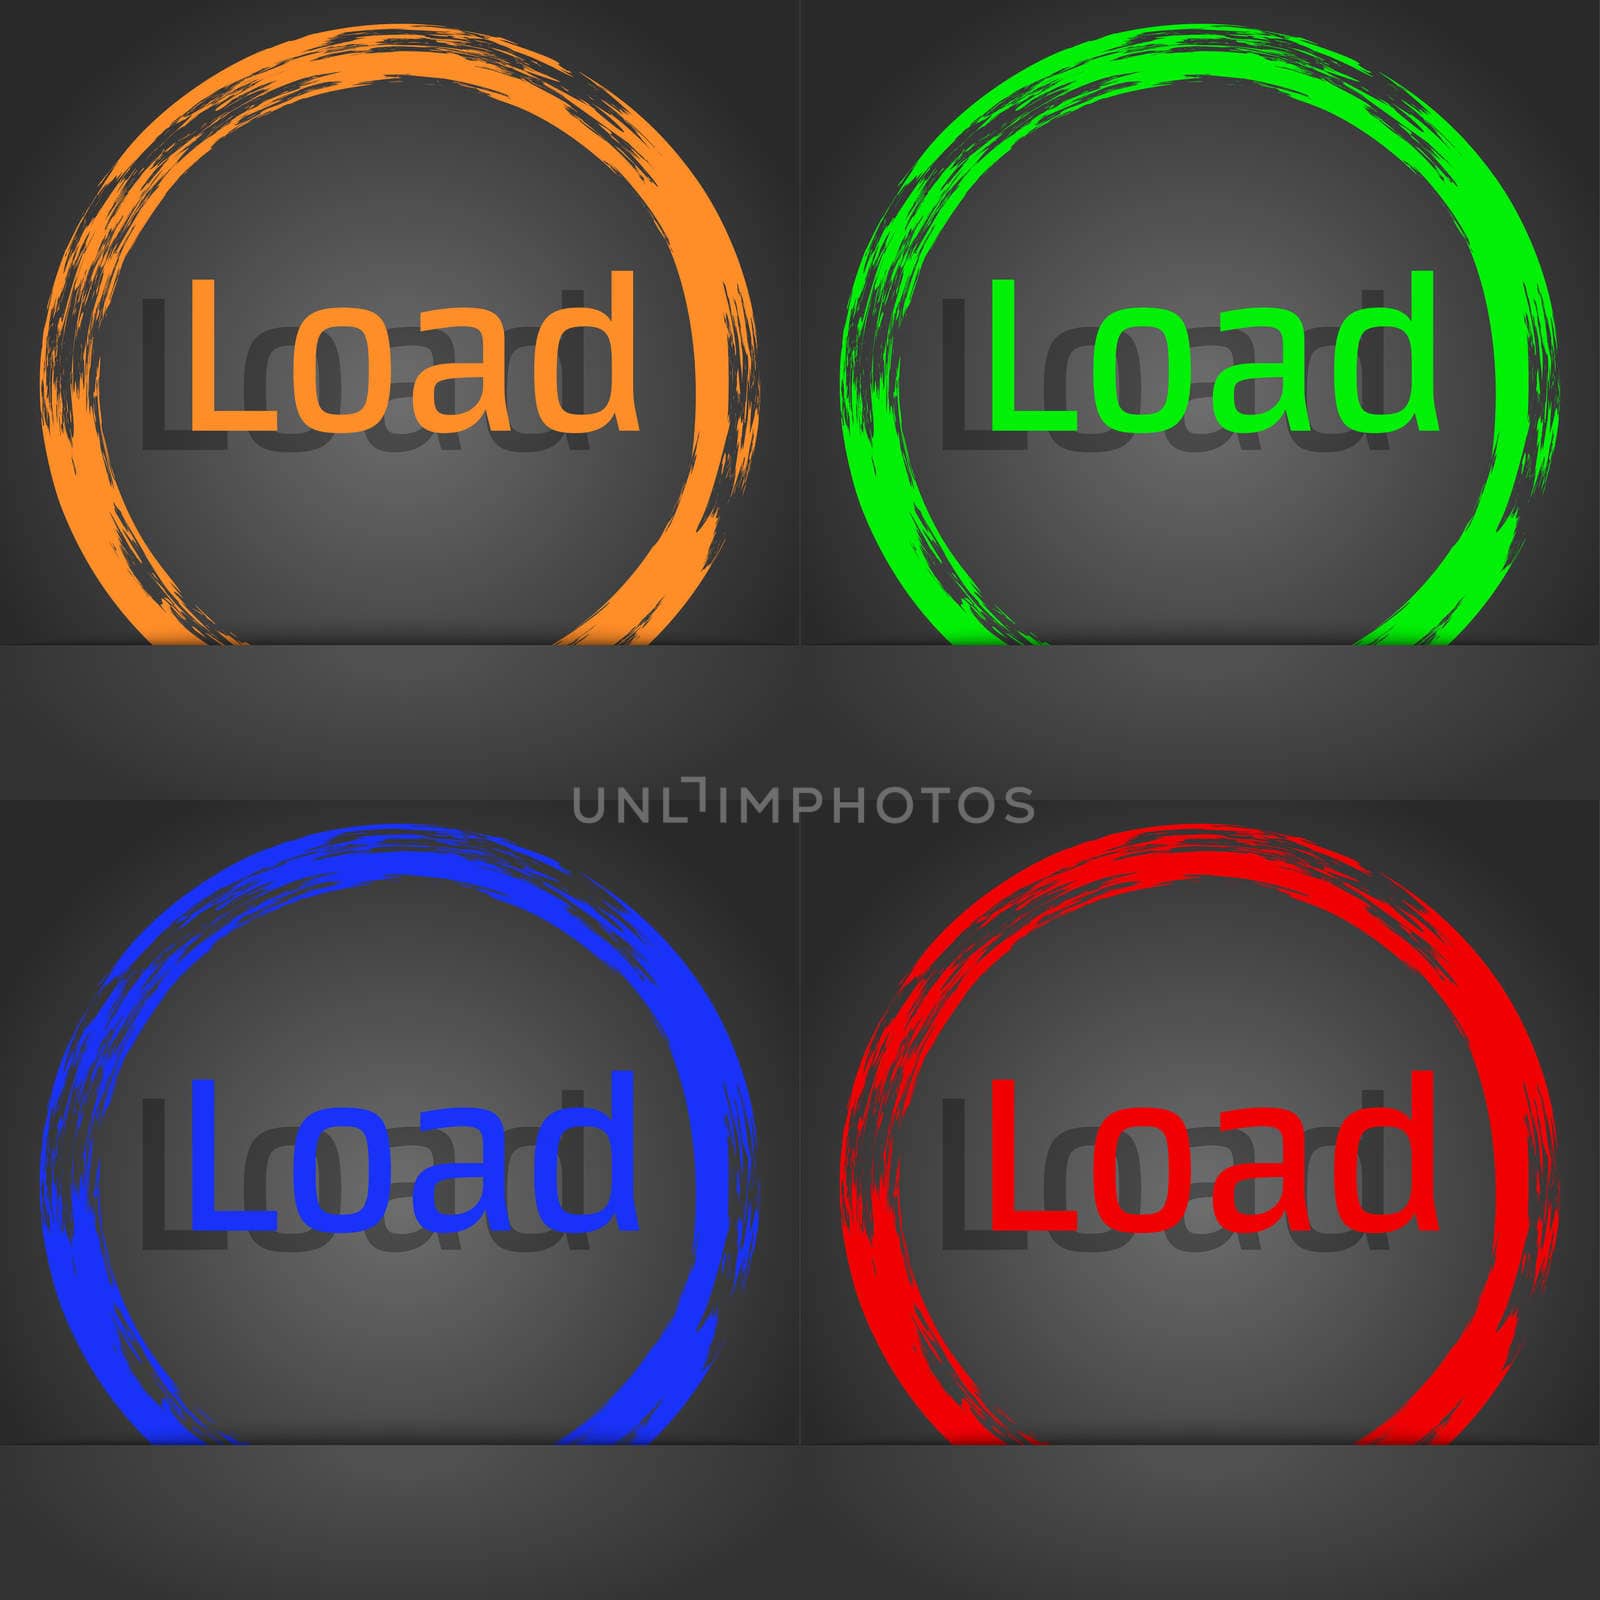 Download now icon. Load symbol. Fashionable modern style. In the orange, green, blue, red design. illustration